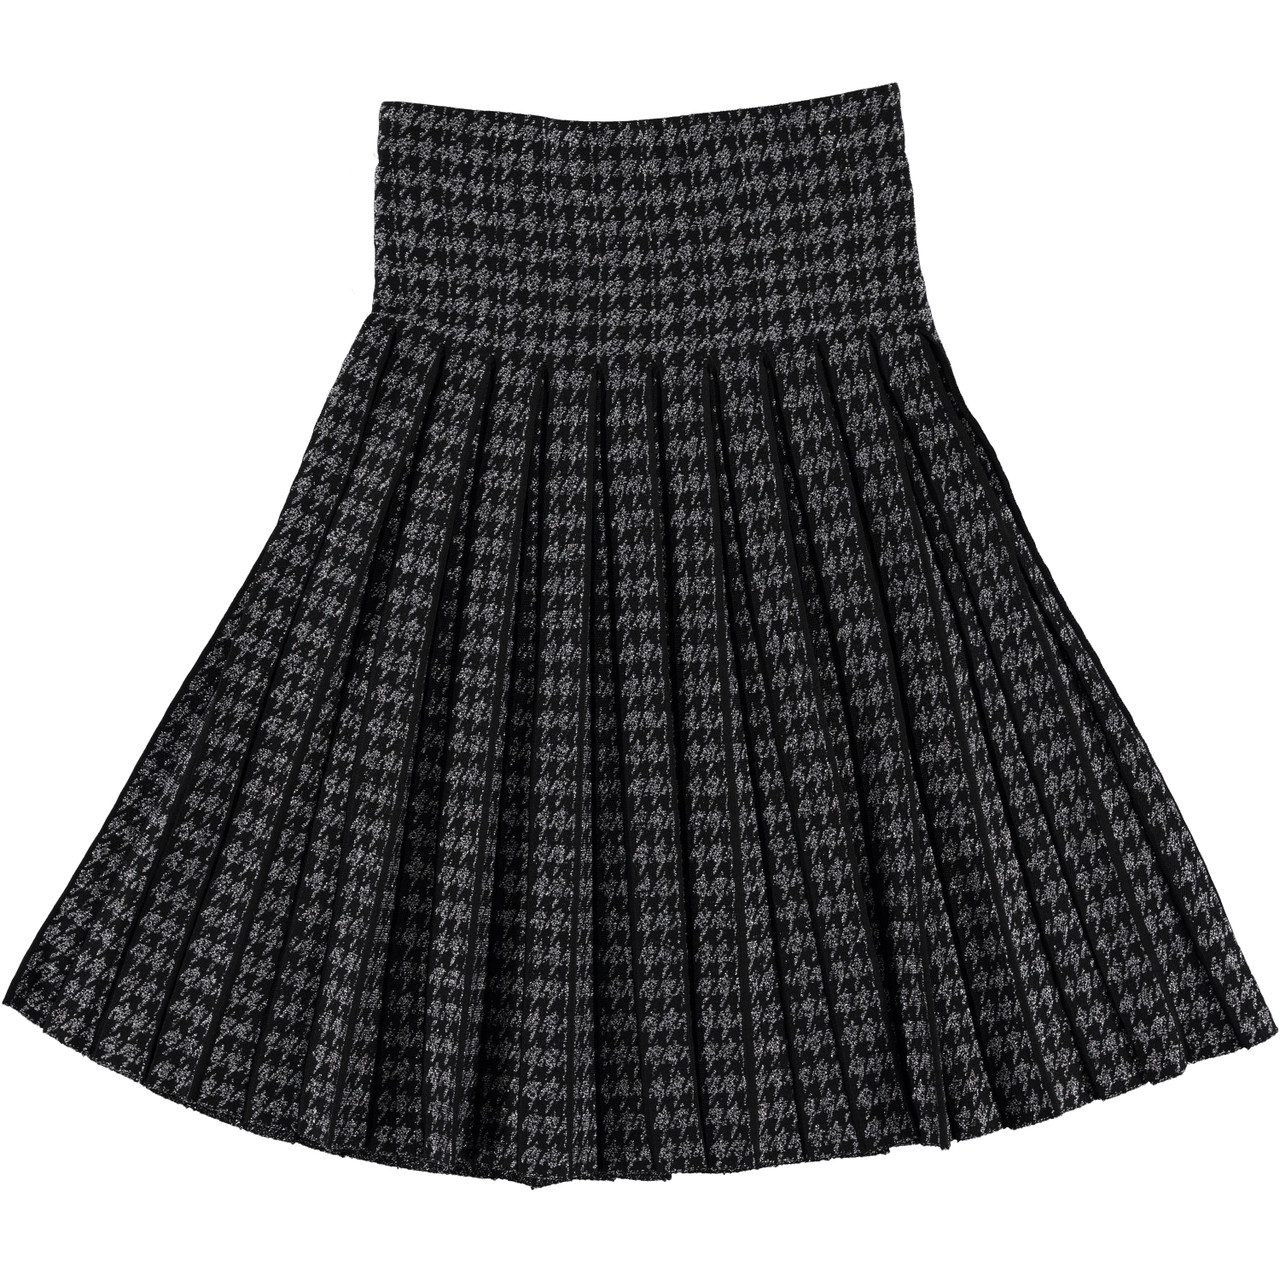 Womens/Teens 25/27 Inches Knit Pleated Skirt - Double Header USA